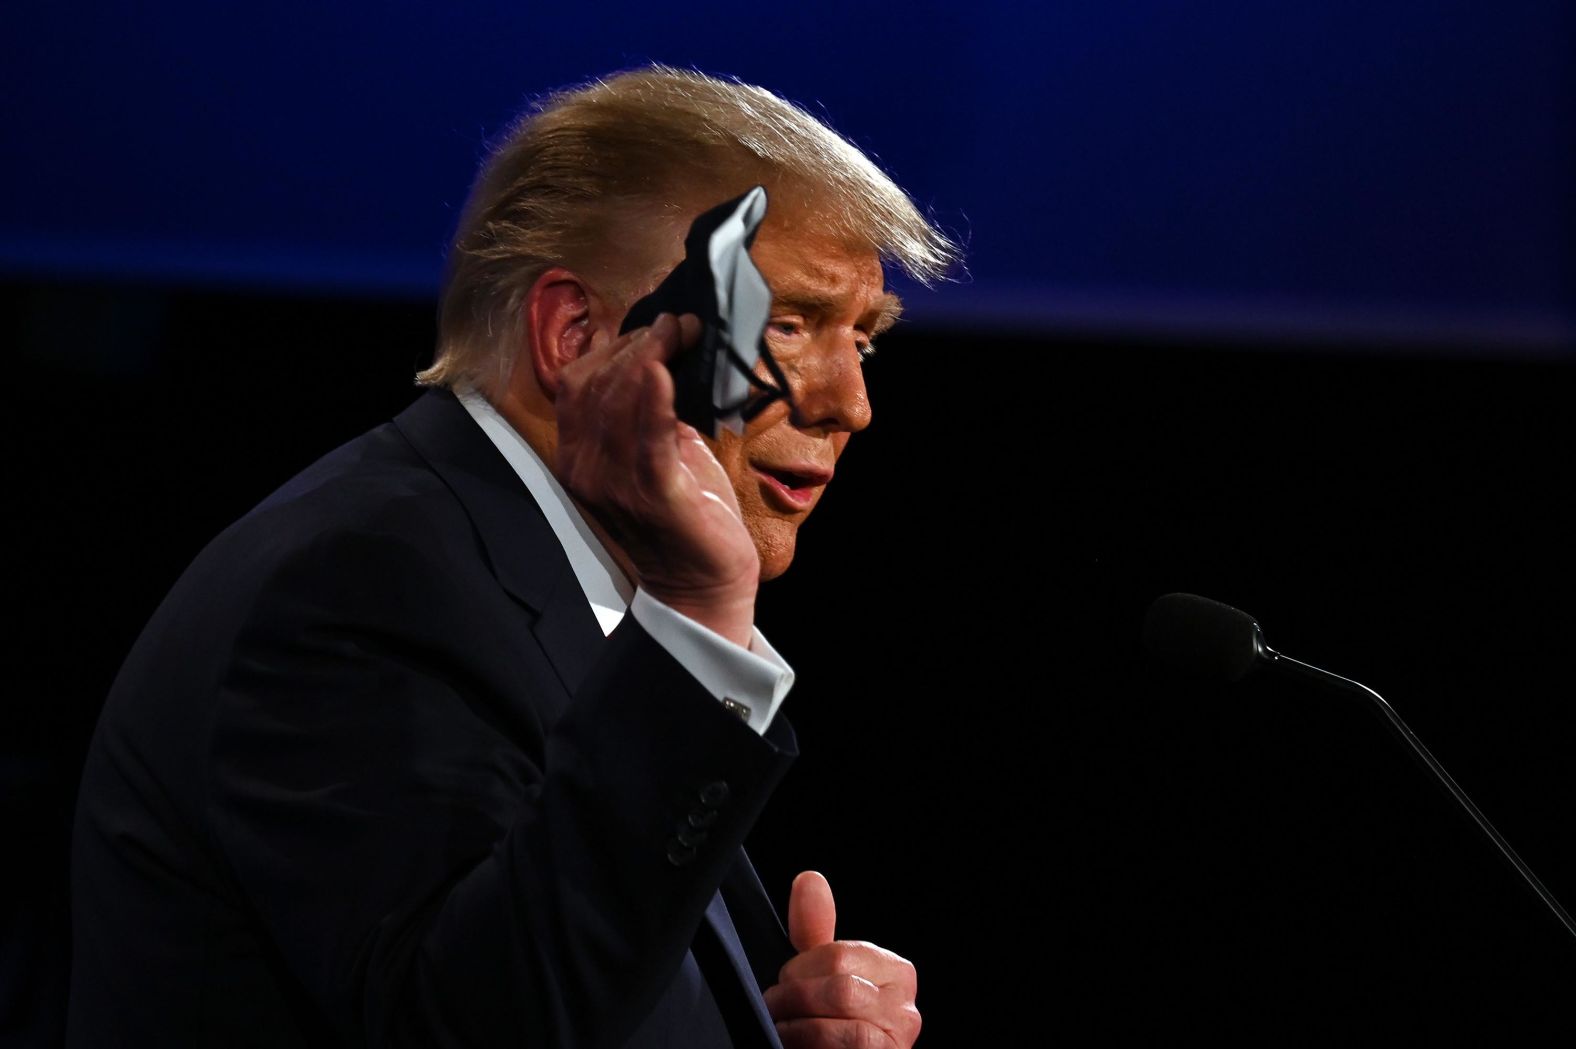 Trump holds a face mask as he speaks during the debate. "I don't wear a mask like (Biden), every time you see him, he's got a mask," <a href="index.php?page=&url=https%3A%2F%2Fwww.cnn.com%2Fpolitics%2Flive-news%2Fpresidential-debate-coverage-fact-check-09-29-20%2Fh_1e0c9b875c0fa789a2ffc63165f27d00" target="_blank">Trump said.</a> "He could be speaking 200 feet away from it, and he shows up with the biggest mask I've ever seen."